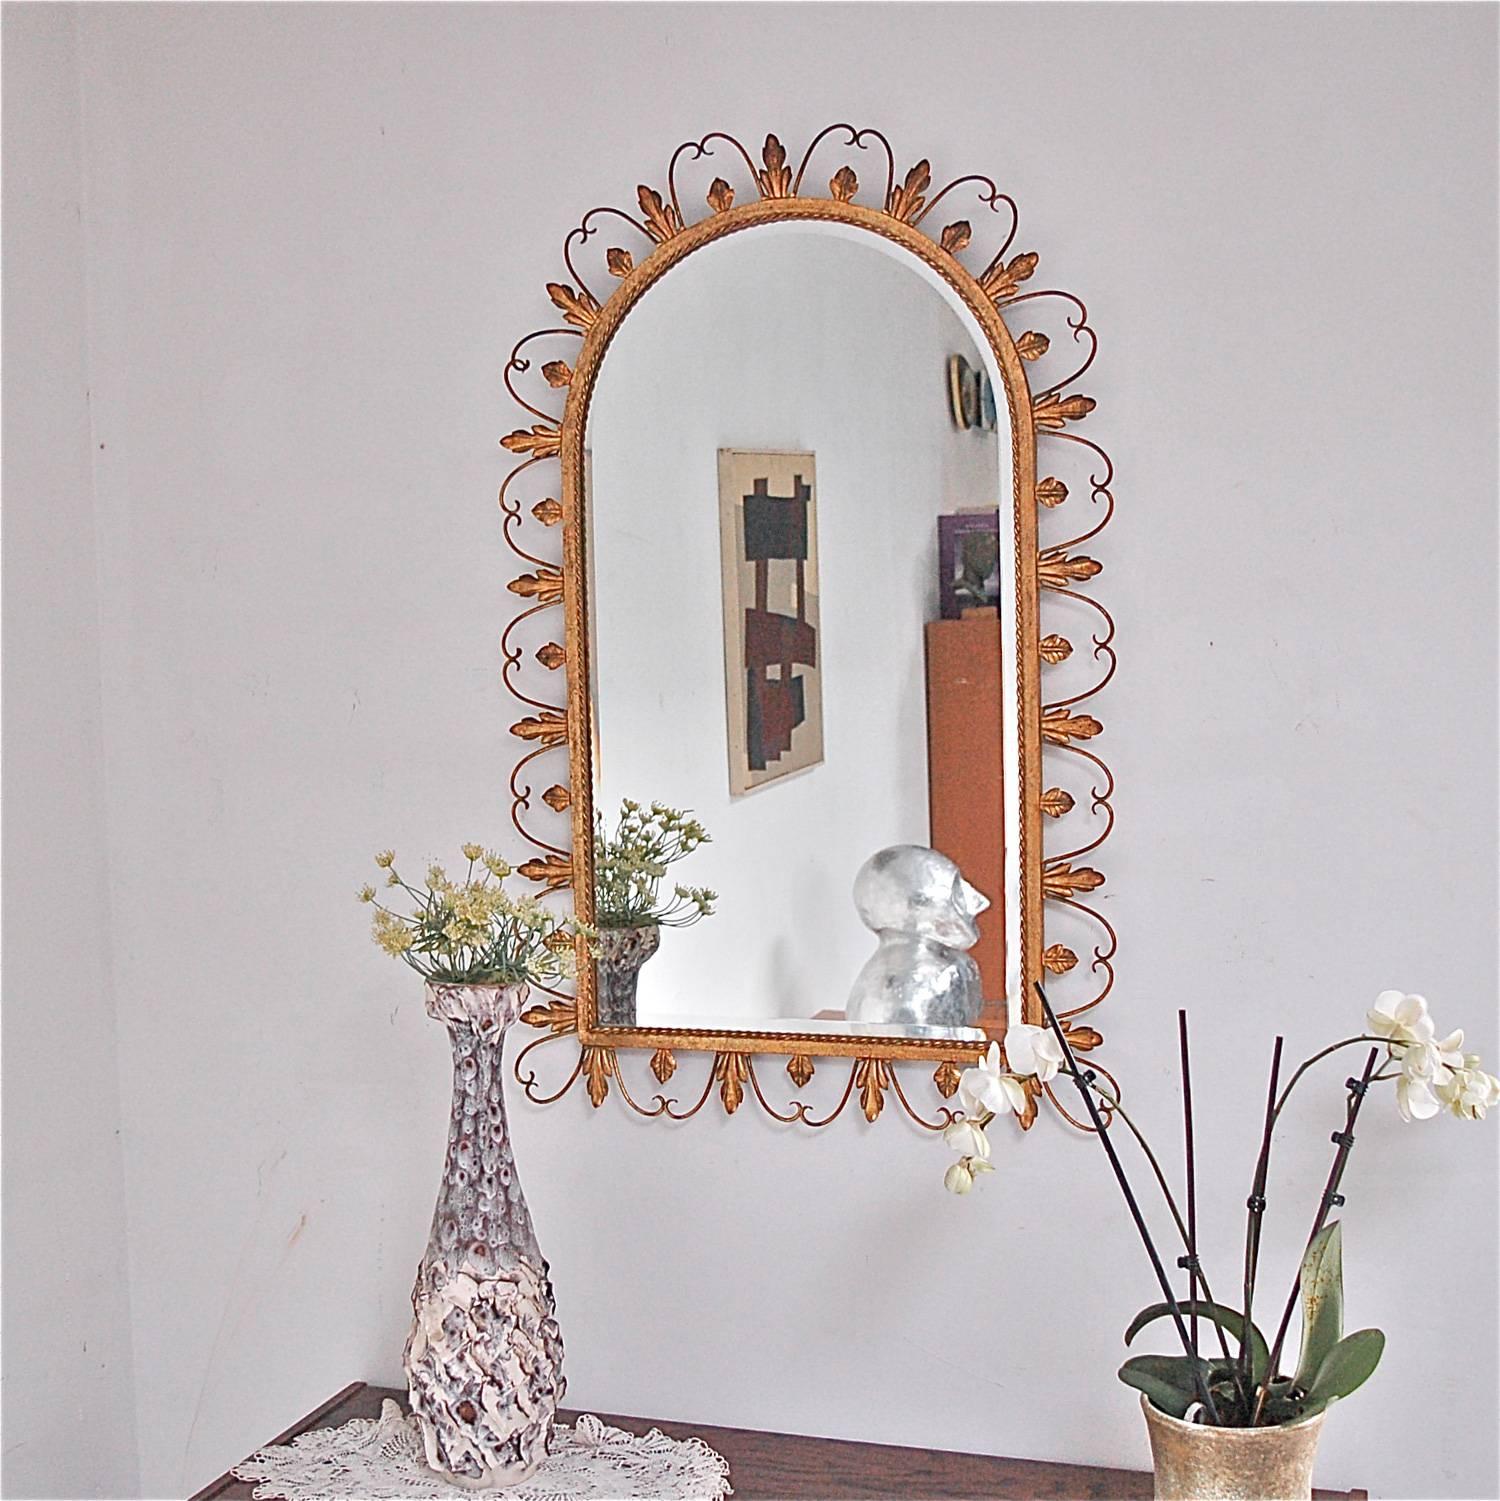 Medium sized mirror in an antique gold coloured metal frame, decorated with leaf detail and rope edging. The simple but effective design features make it very useable in a variety of different places like bathroom, powder room, bedroom, hallway or